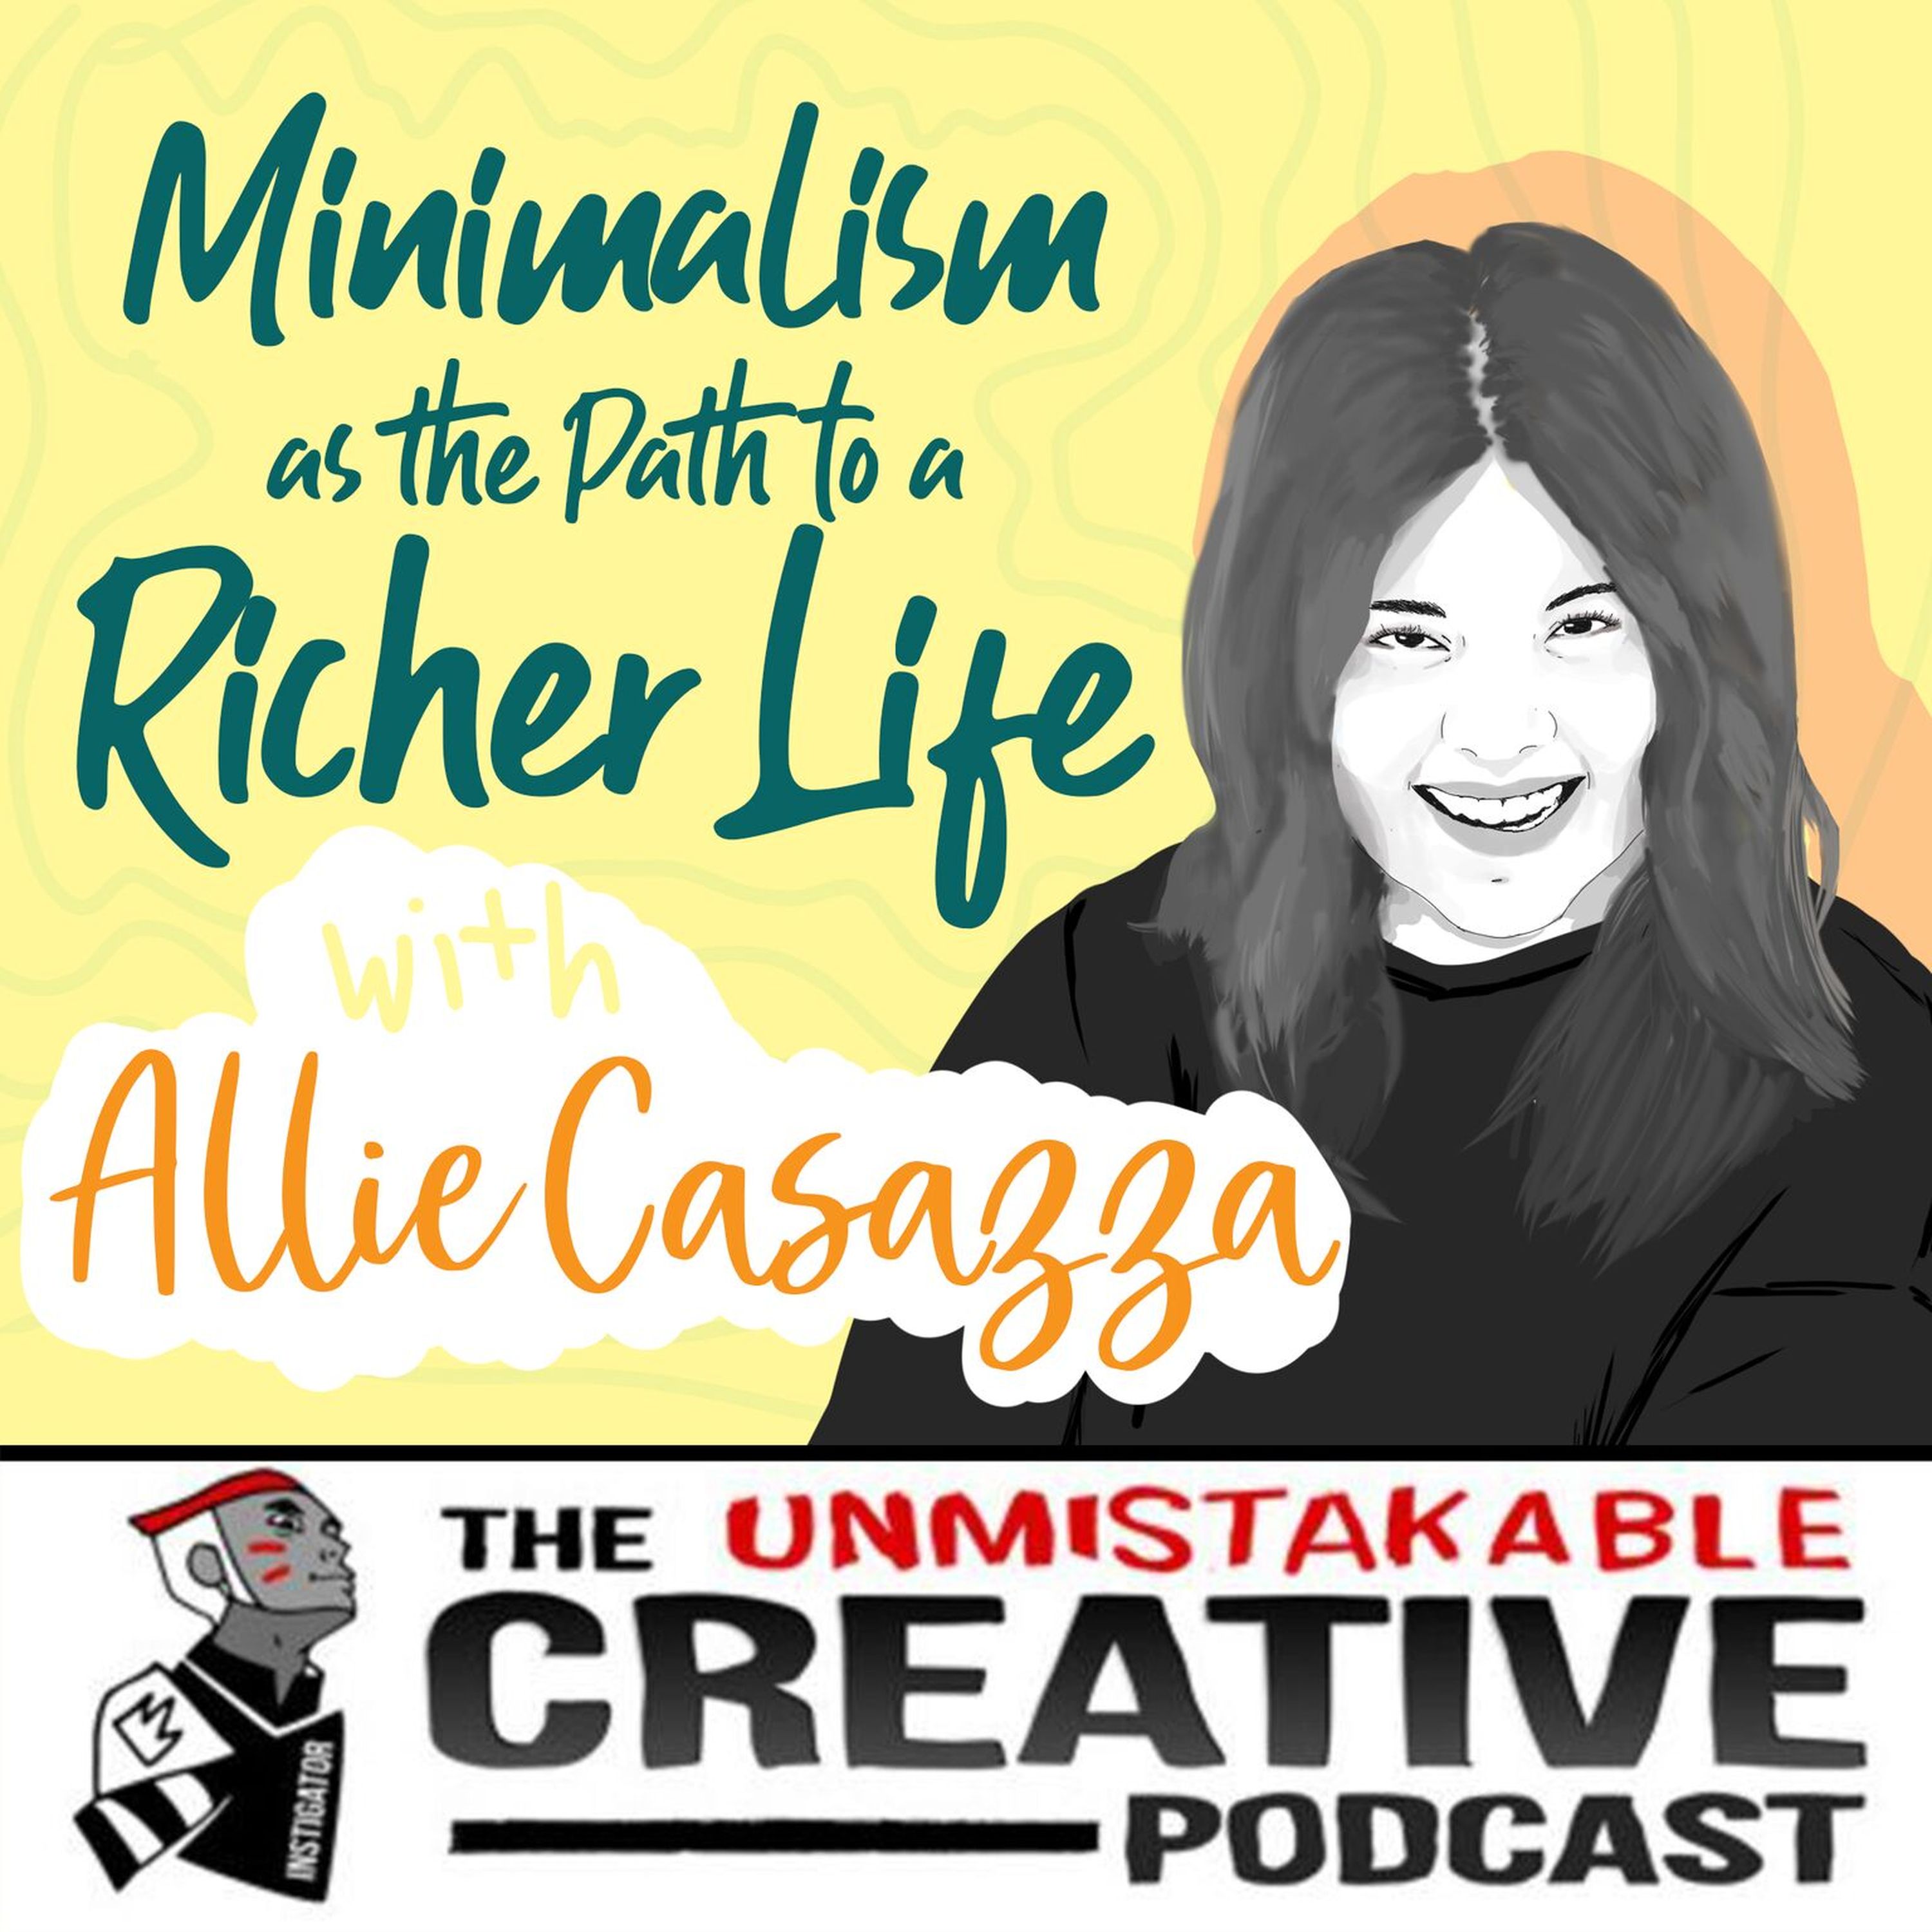 Minimalism as The Path to a Richer Life with Allie Casazza Image